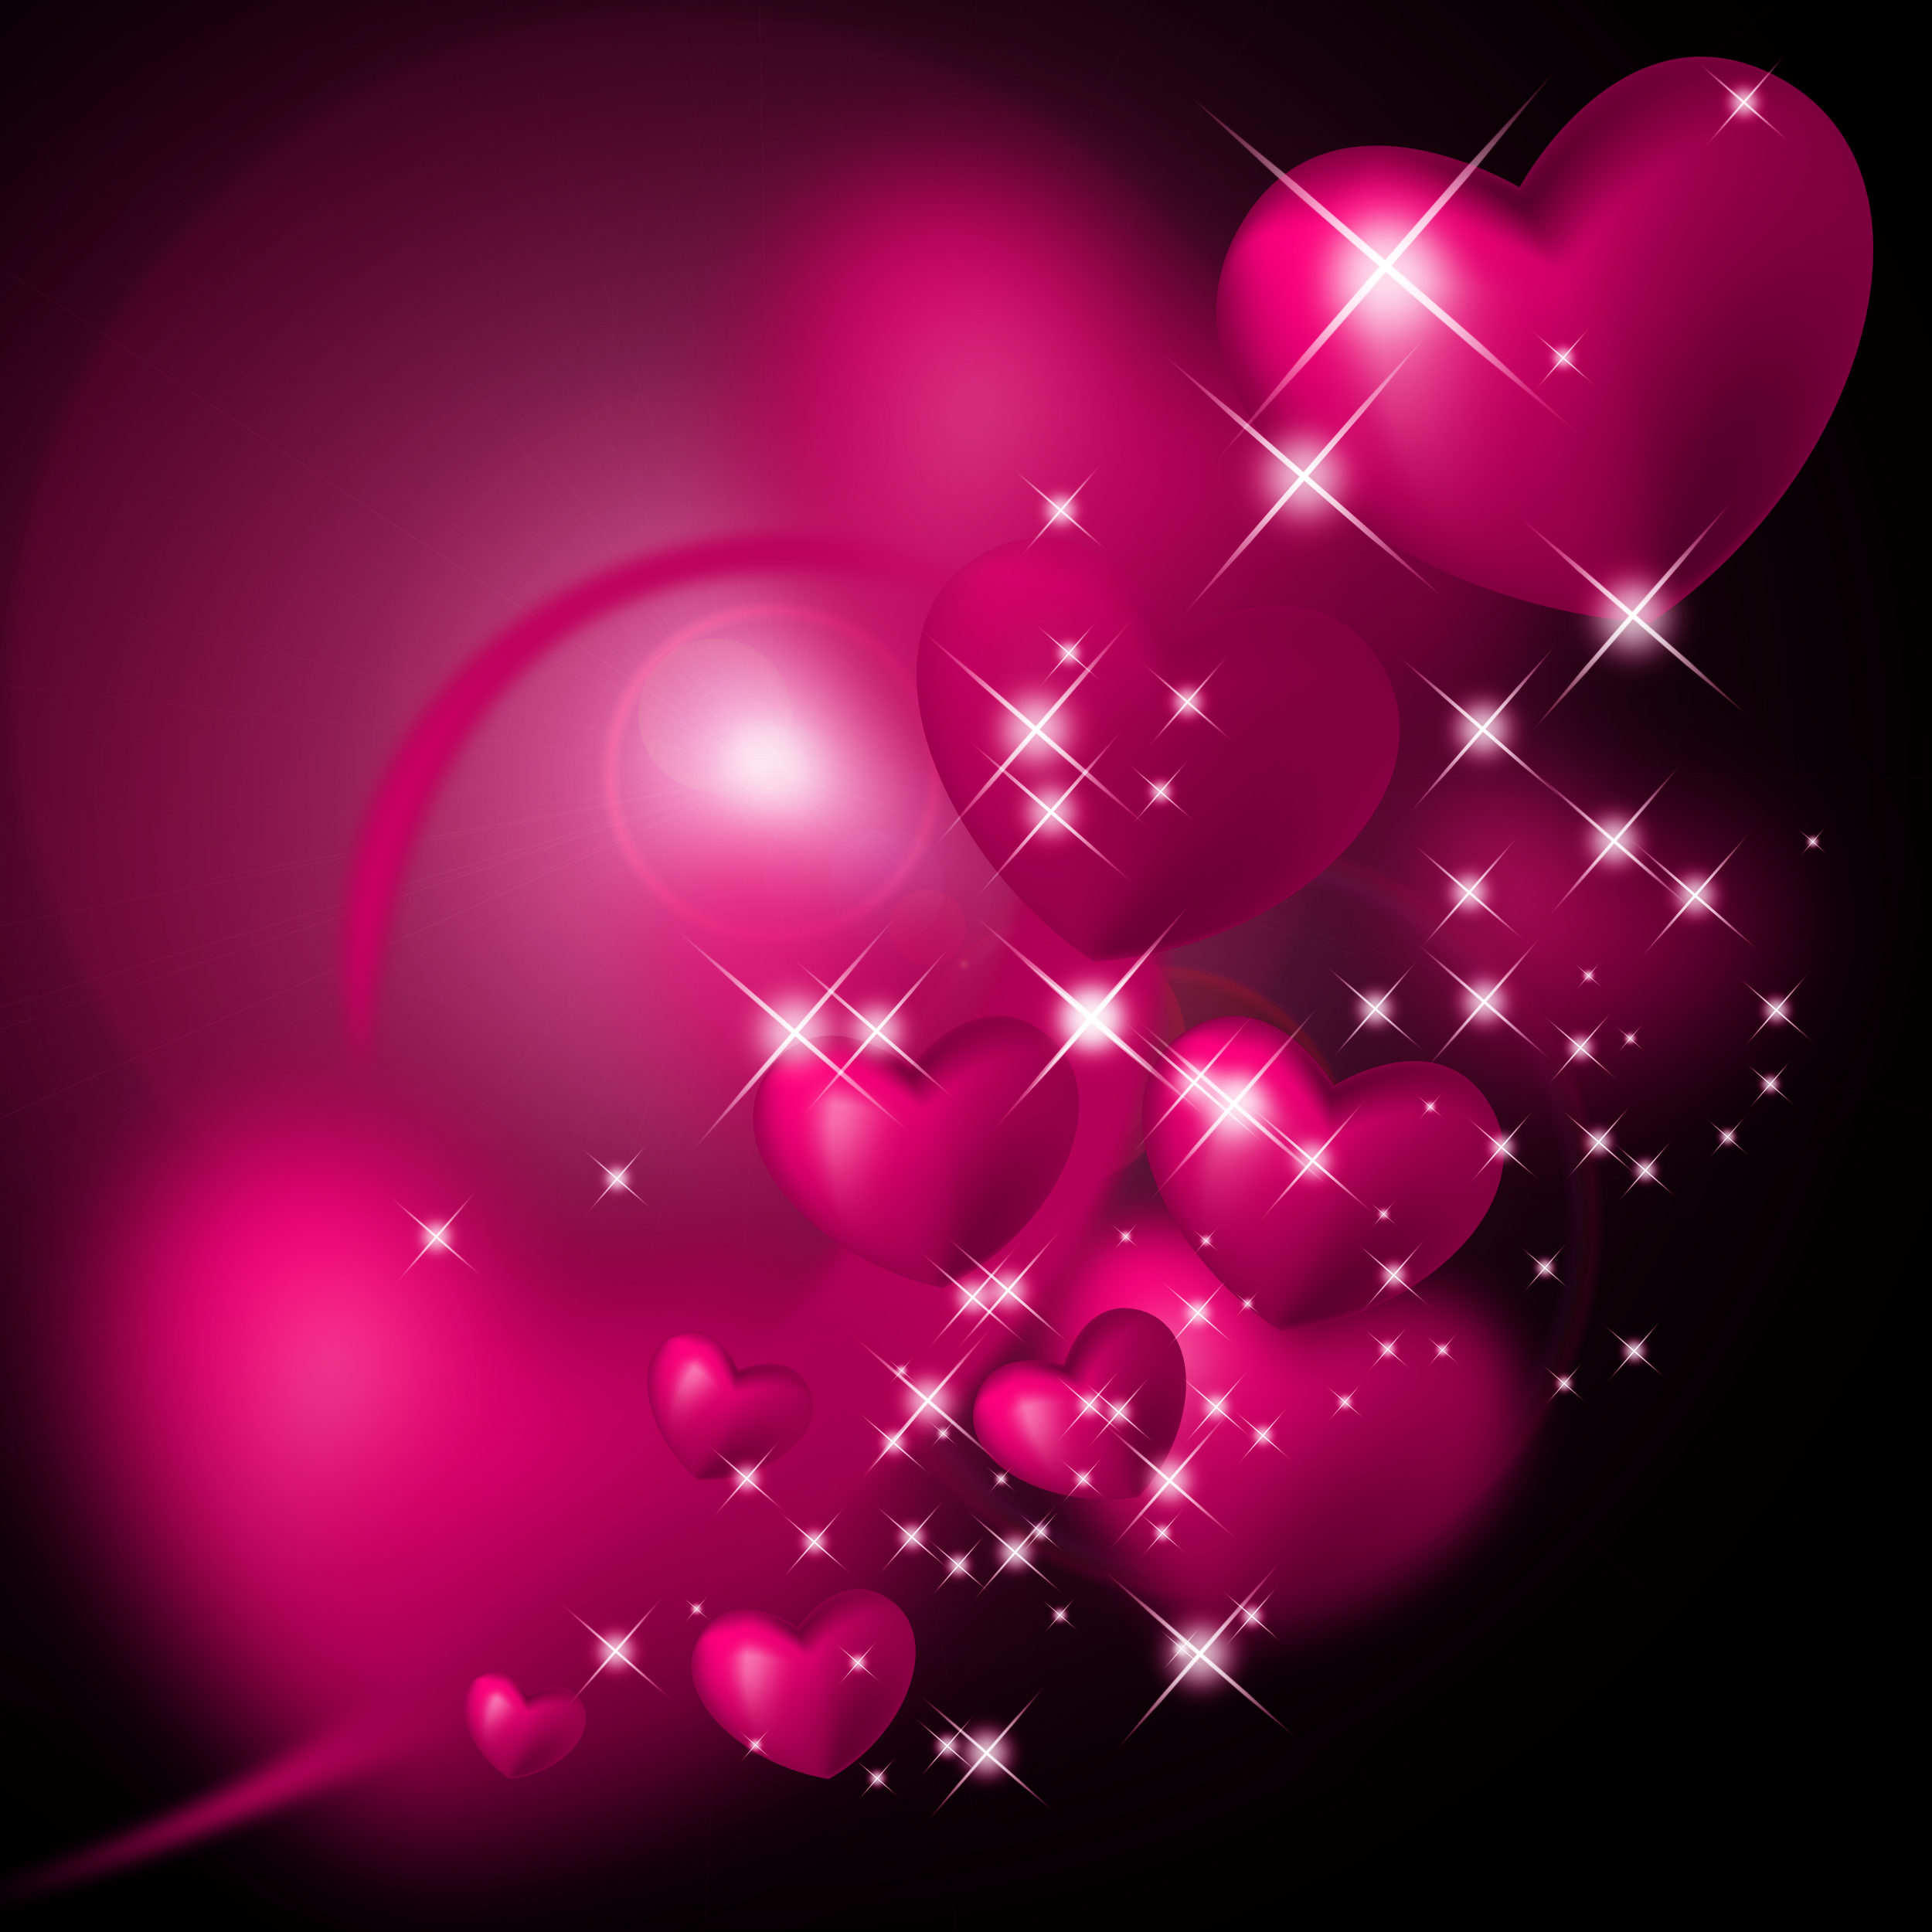 Free Valentine Backgrounds   Free Downloads and Add ons for Photoshop